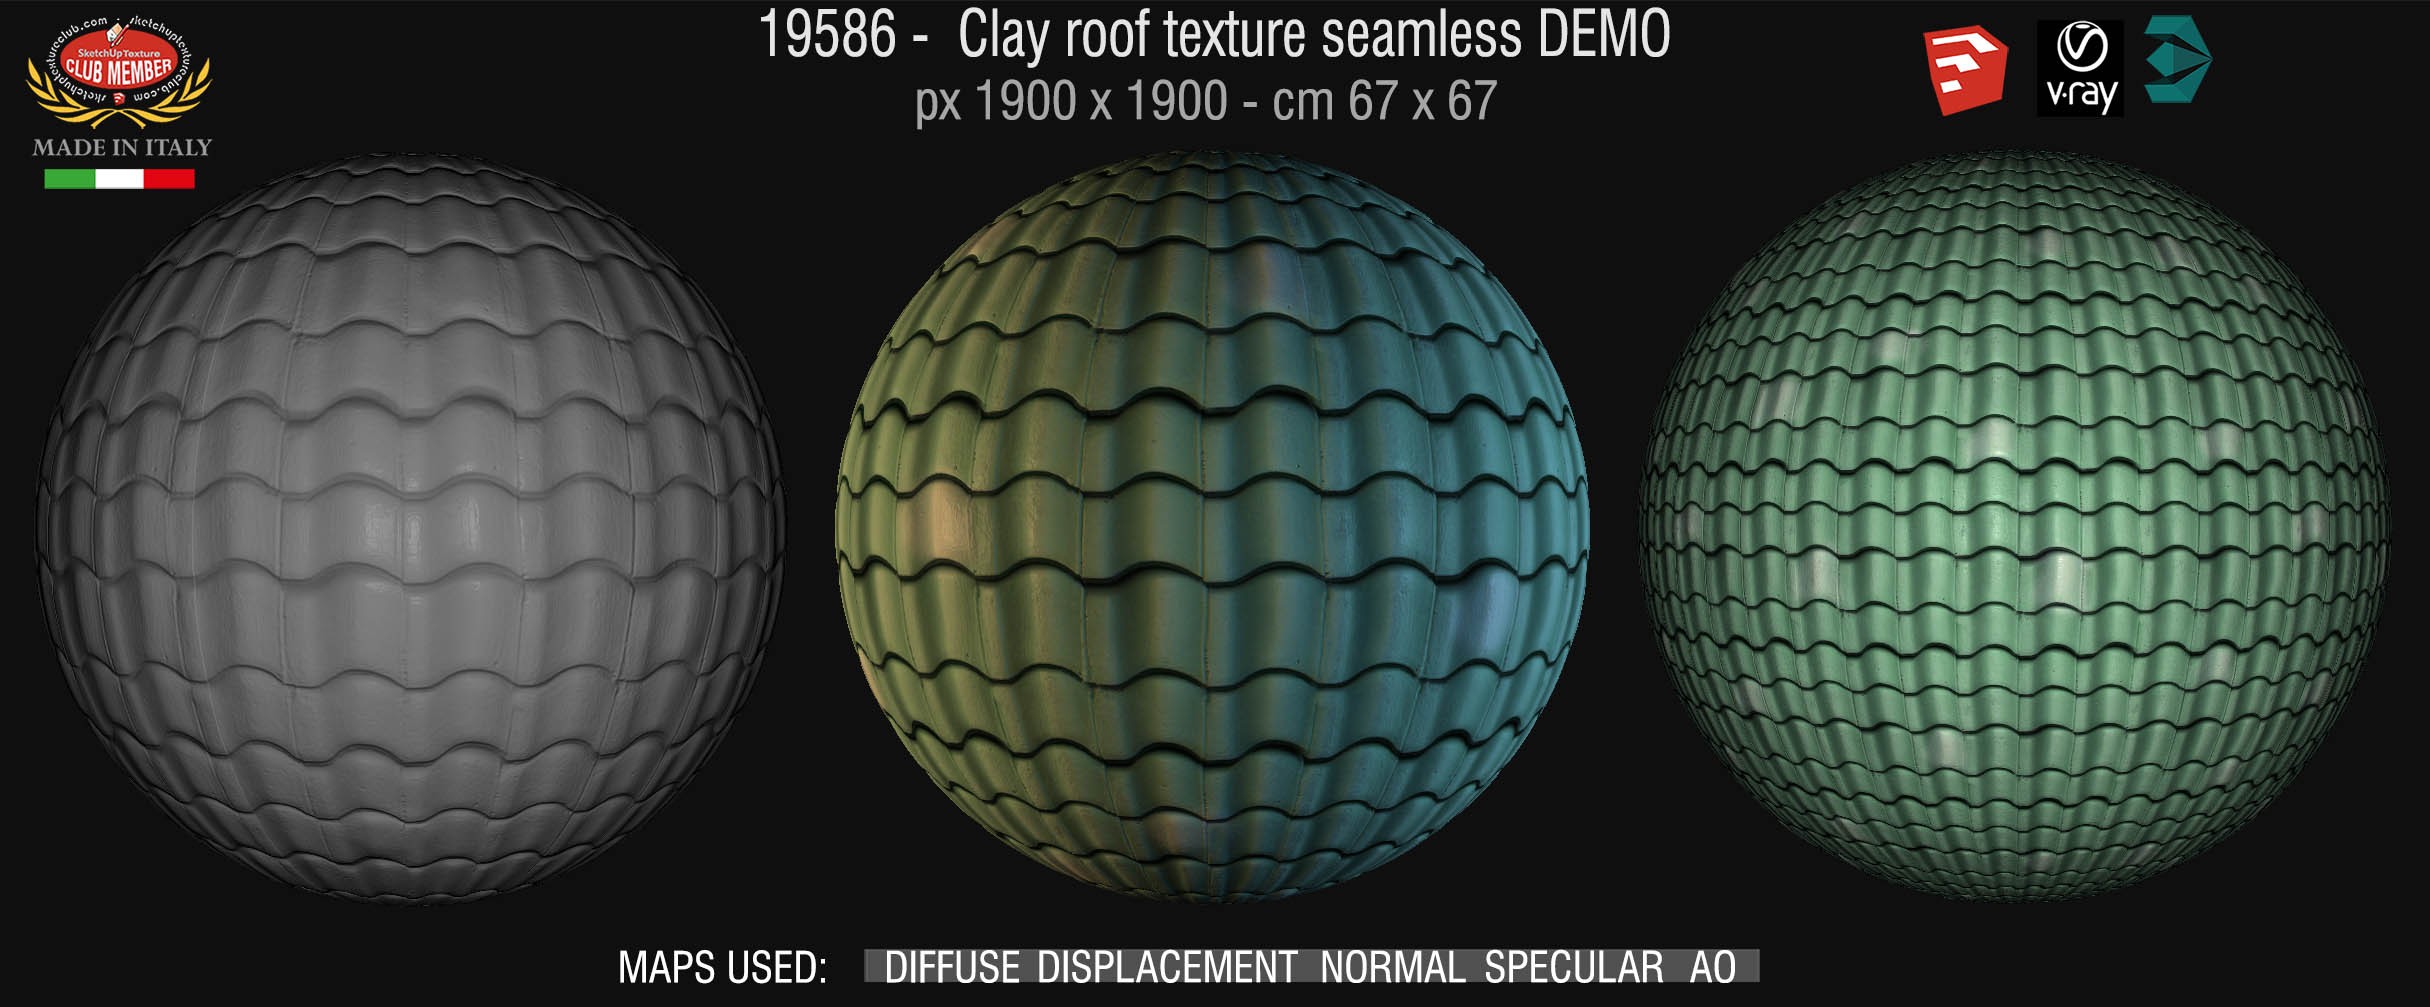 19586 Clay roof texture seamless + maps DEMO